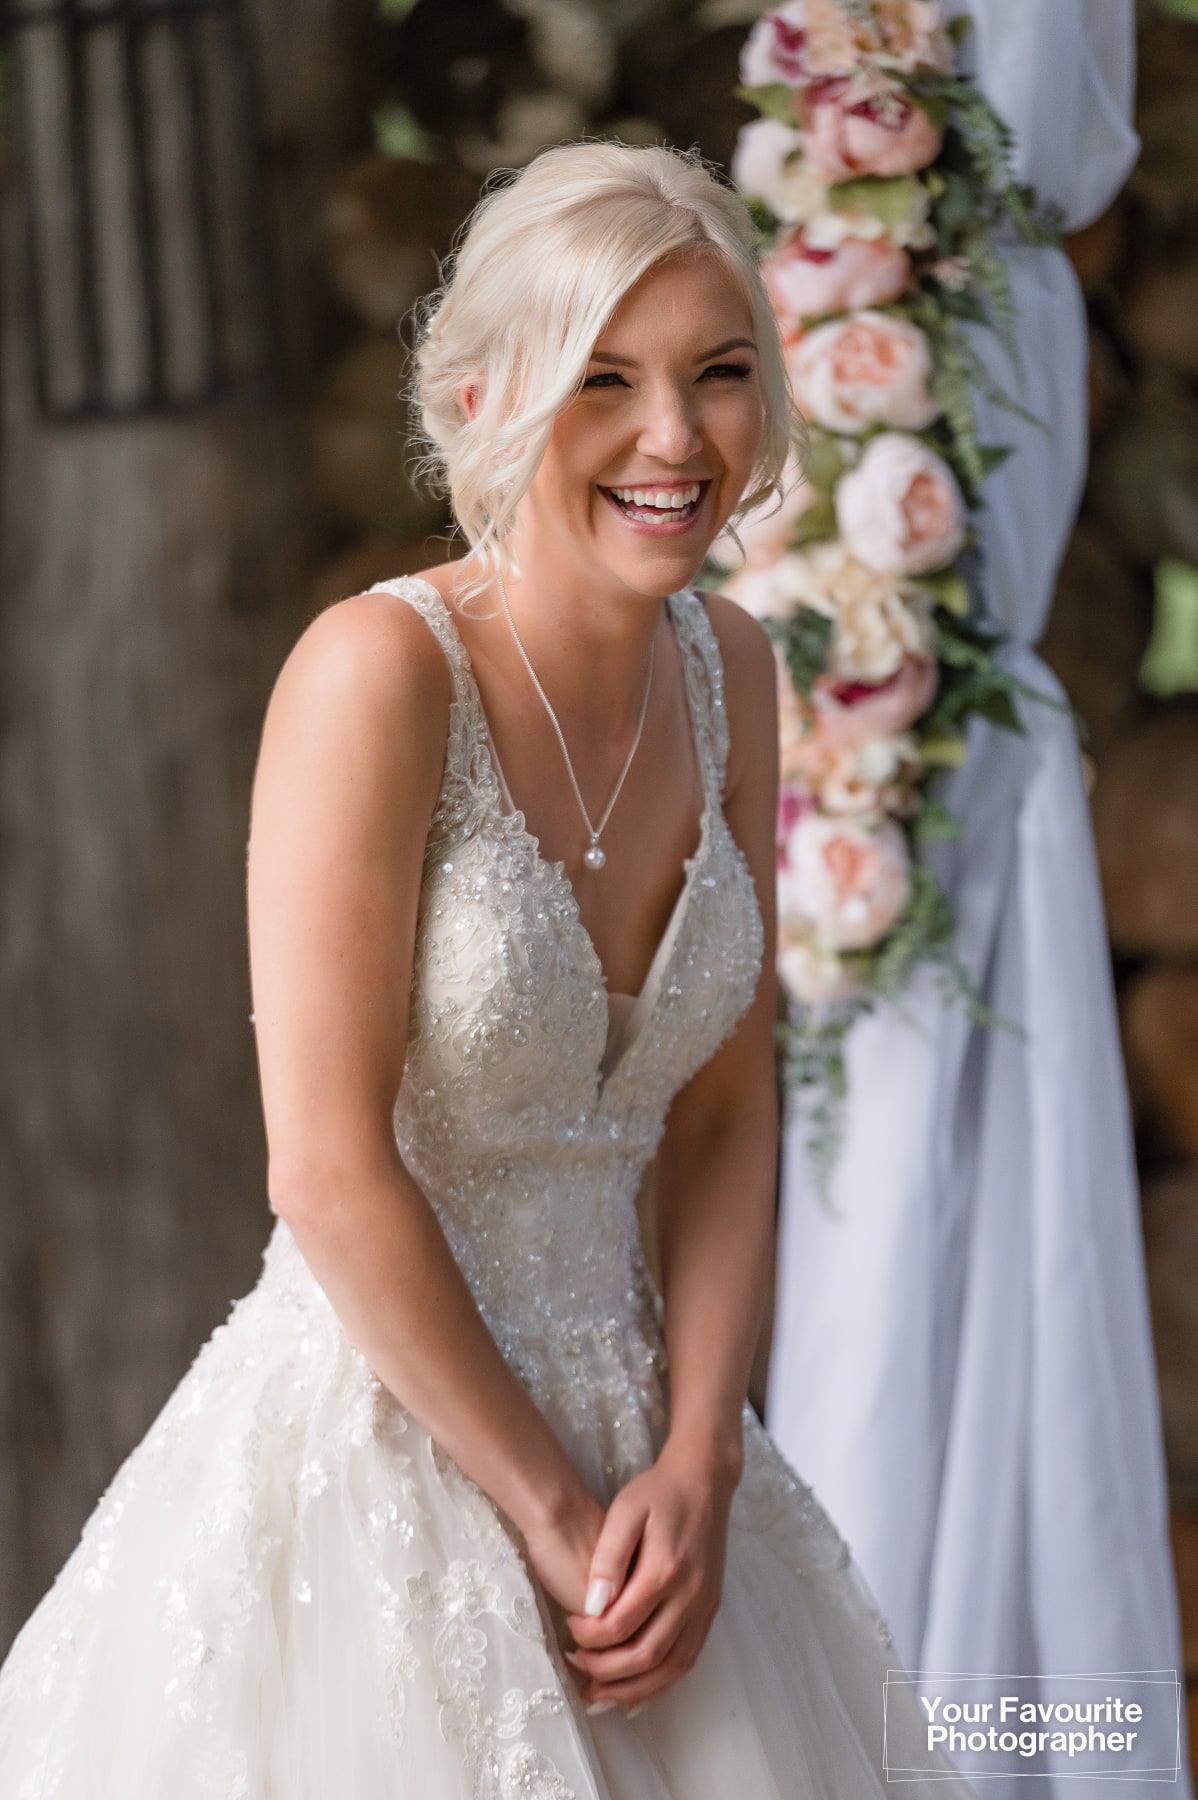 Smiling bride at ceremony